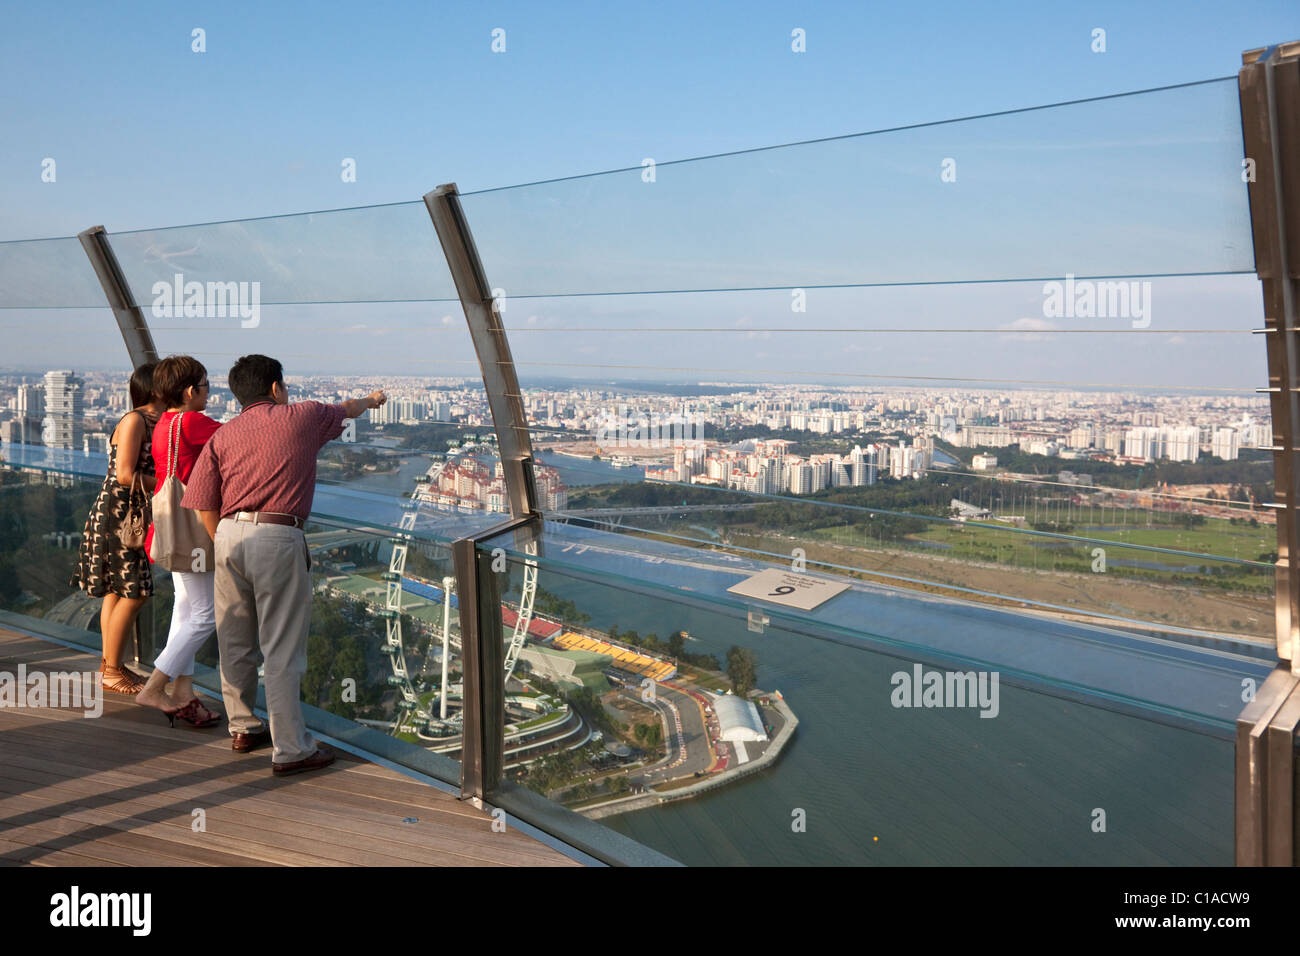 Tourists looking out over city from observation deck of the Marina Bay Sands SkyPark.  Marina Bay, Singapore Stock Photo